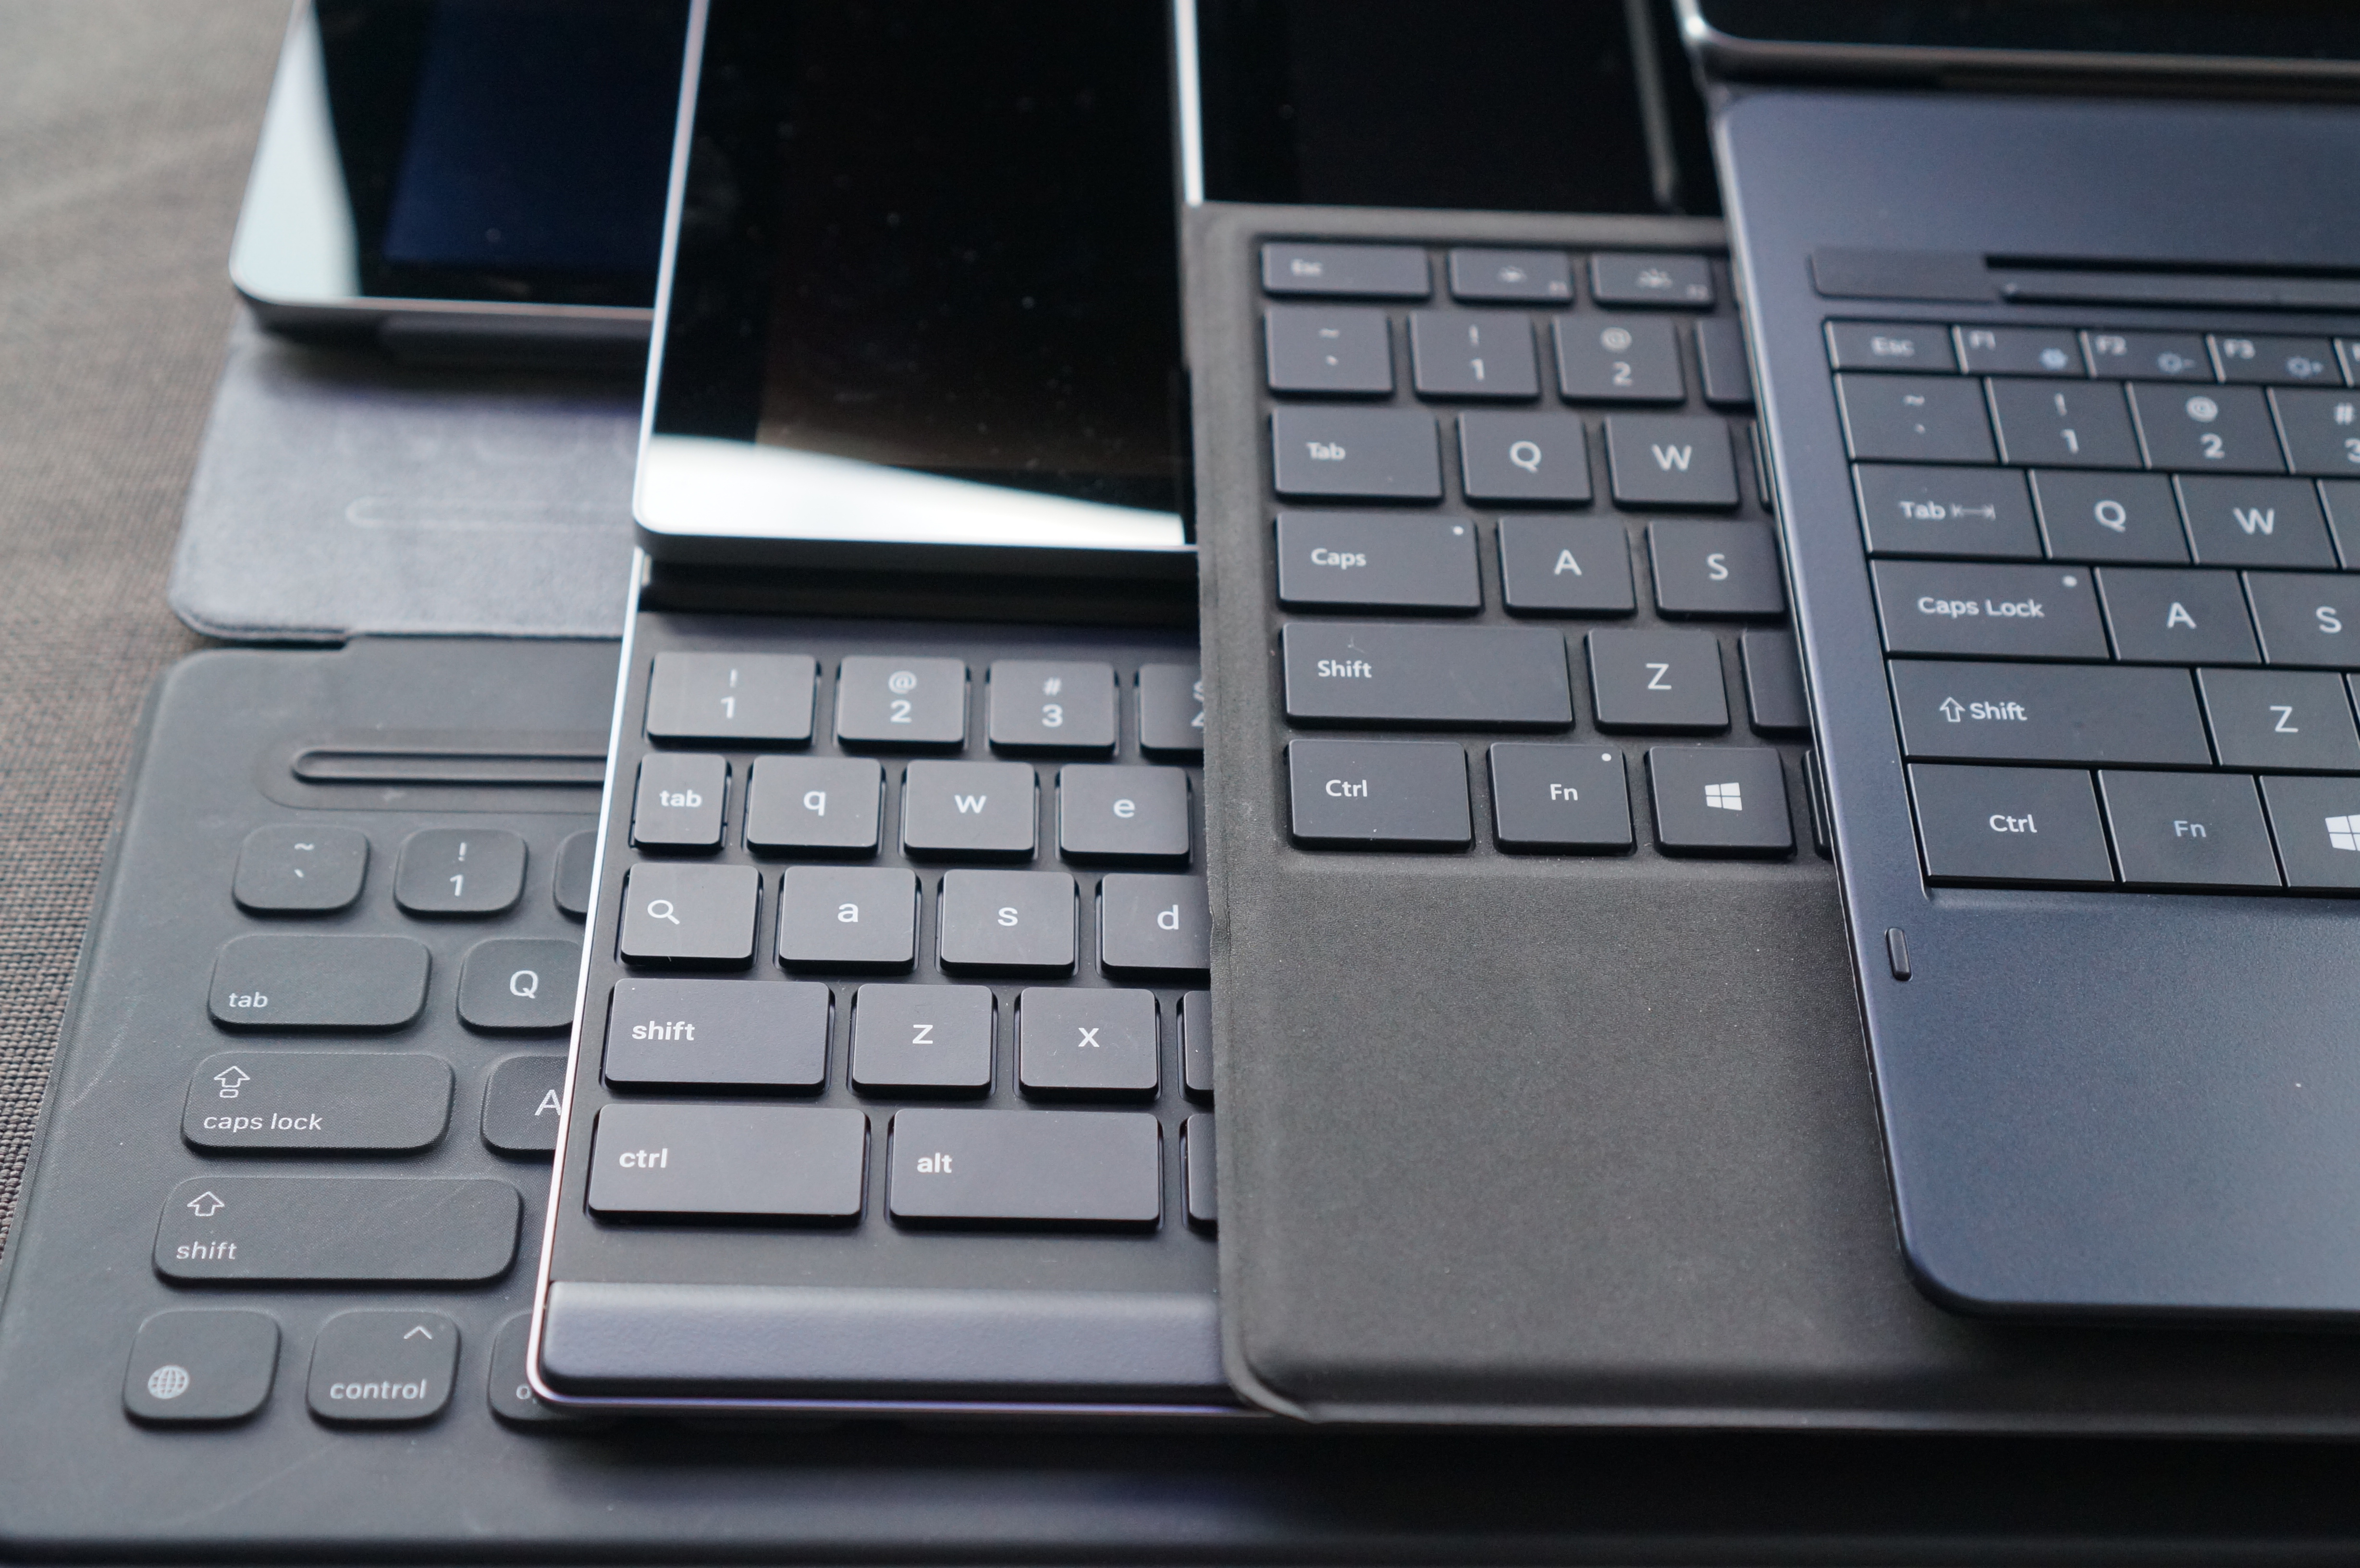 Samsung, not Microsoft, is the reason Apple iPad Pro is pitched as a Windows 10 PC-killer